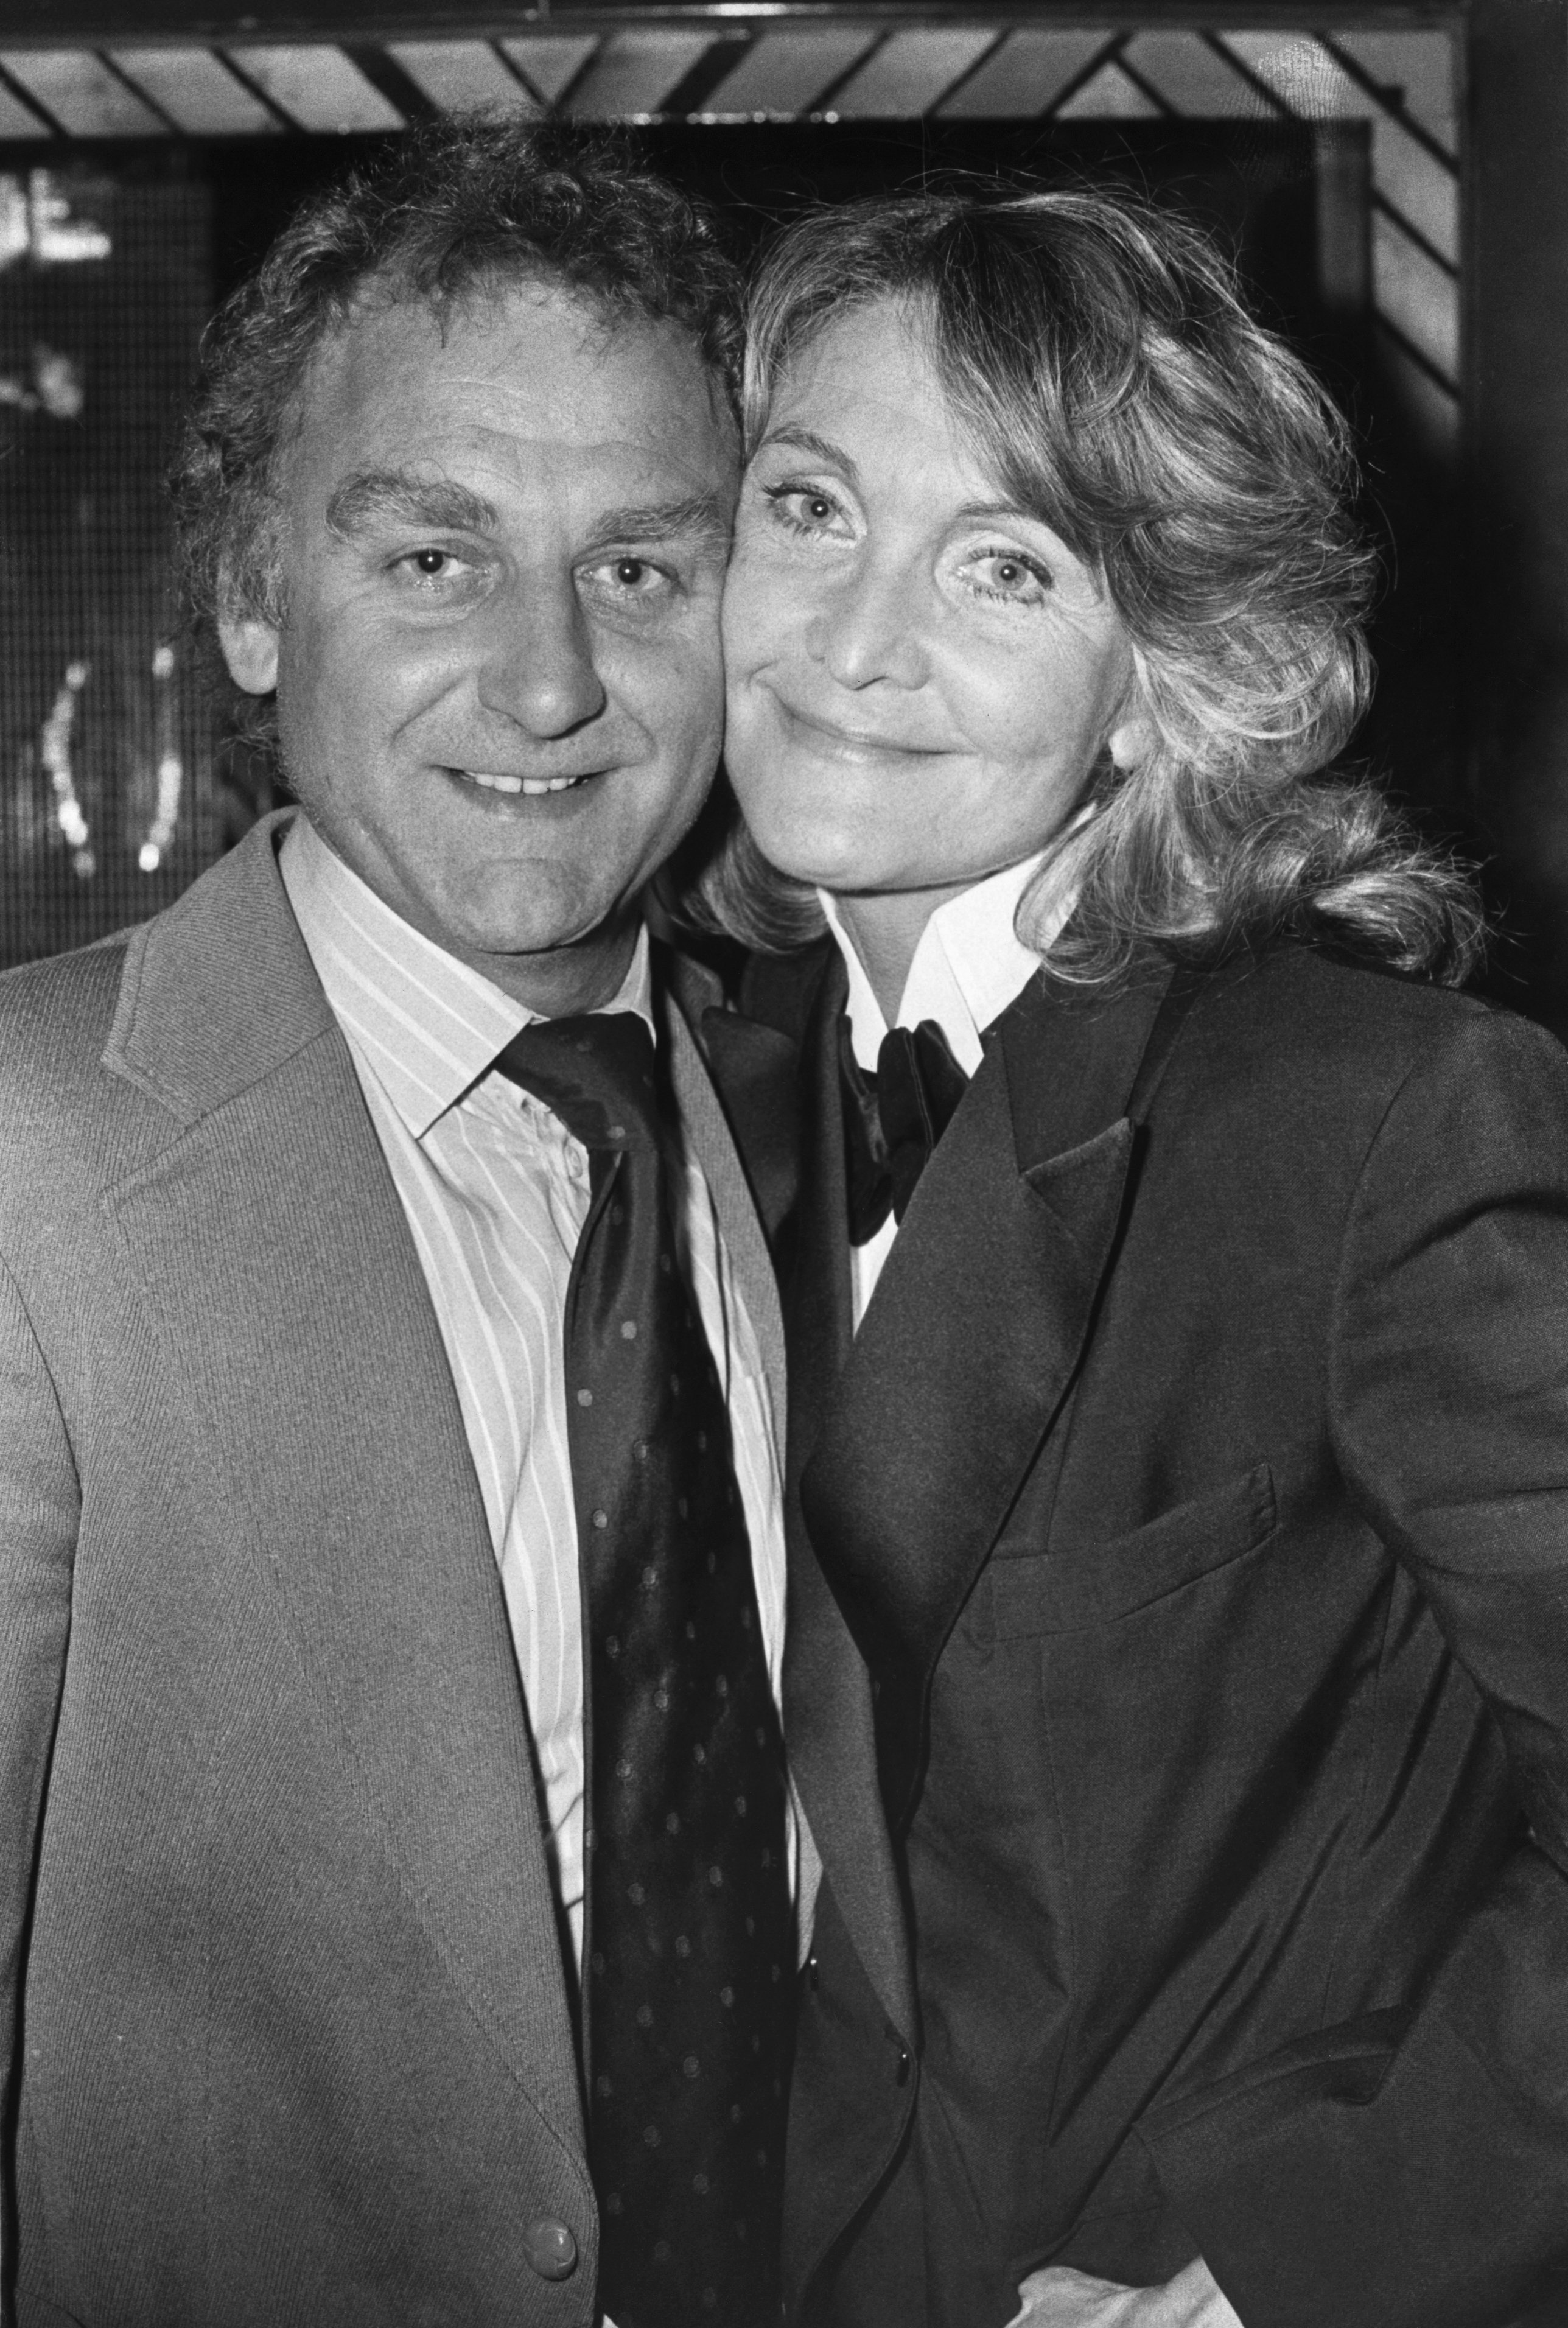 Sheila Hancock attends a party with her husband actor John Shaw in Kensington, London, 1980 | Photo: Getty Images